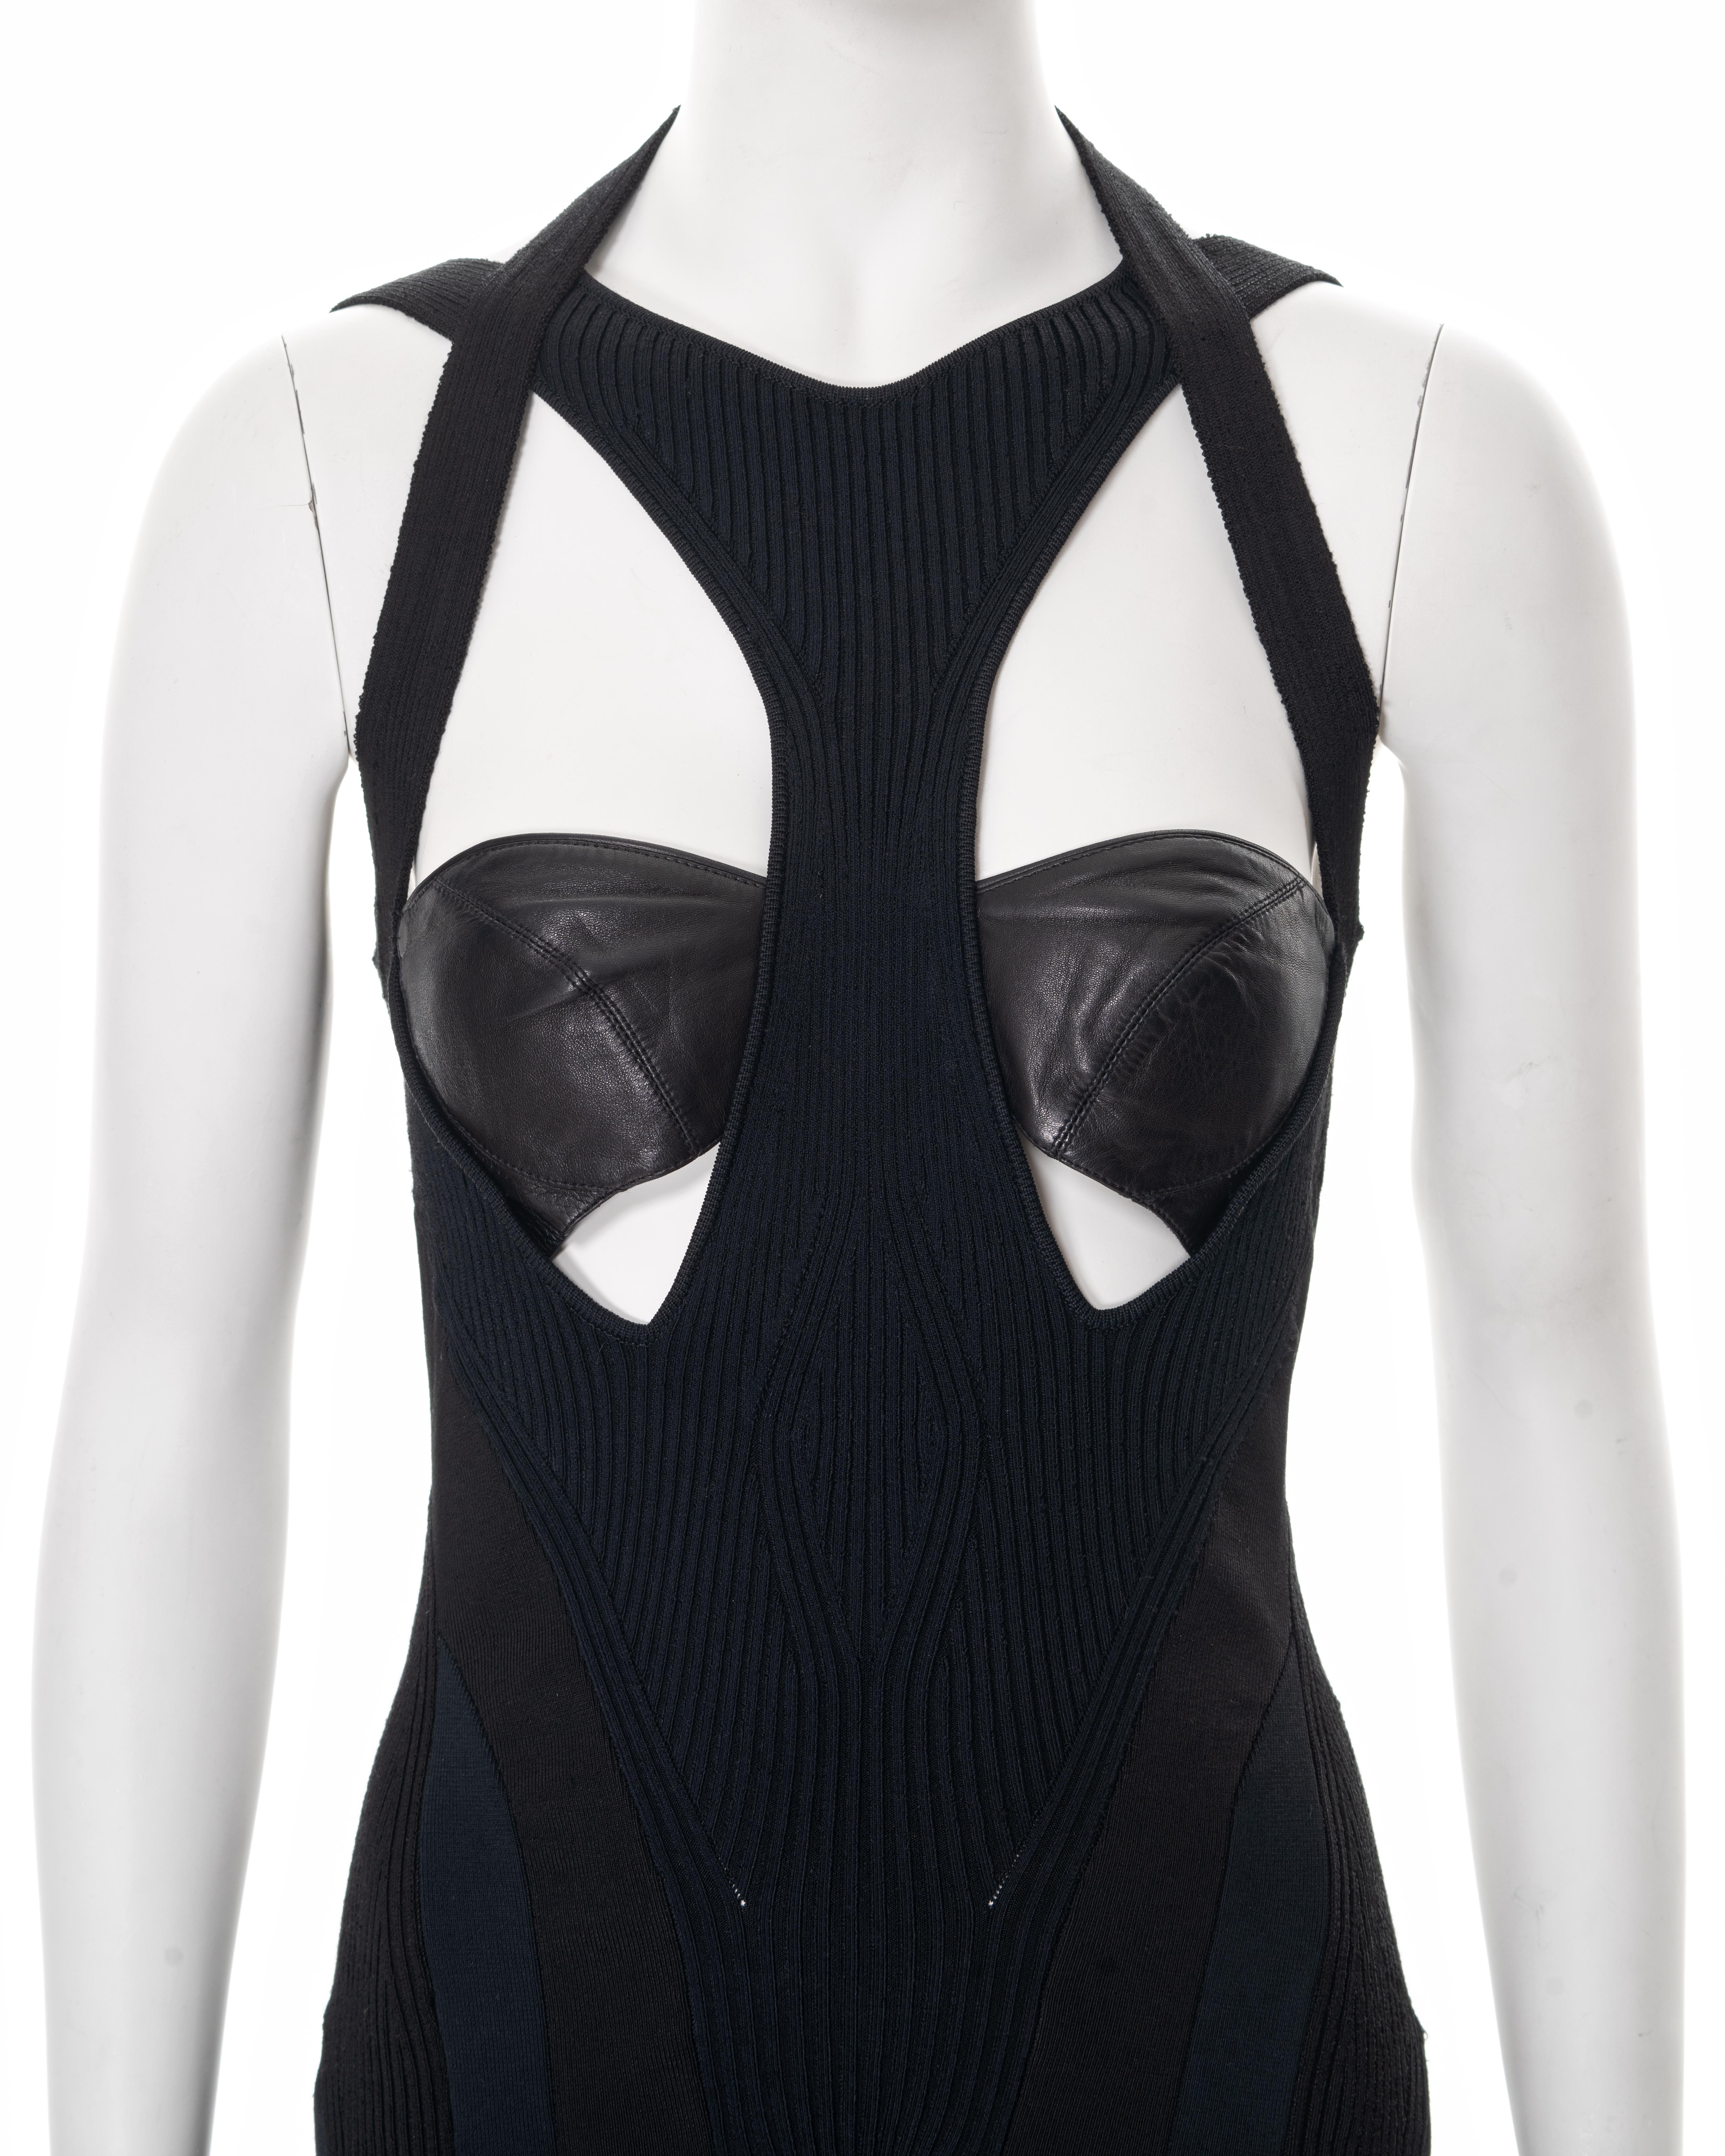 Alexander McQueen black rib knit mini dress with leather bustier, ss 2004 In Excellent Condition For Sale In London, GB